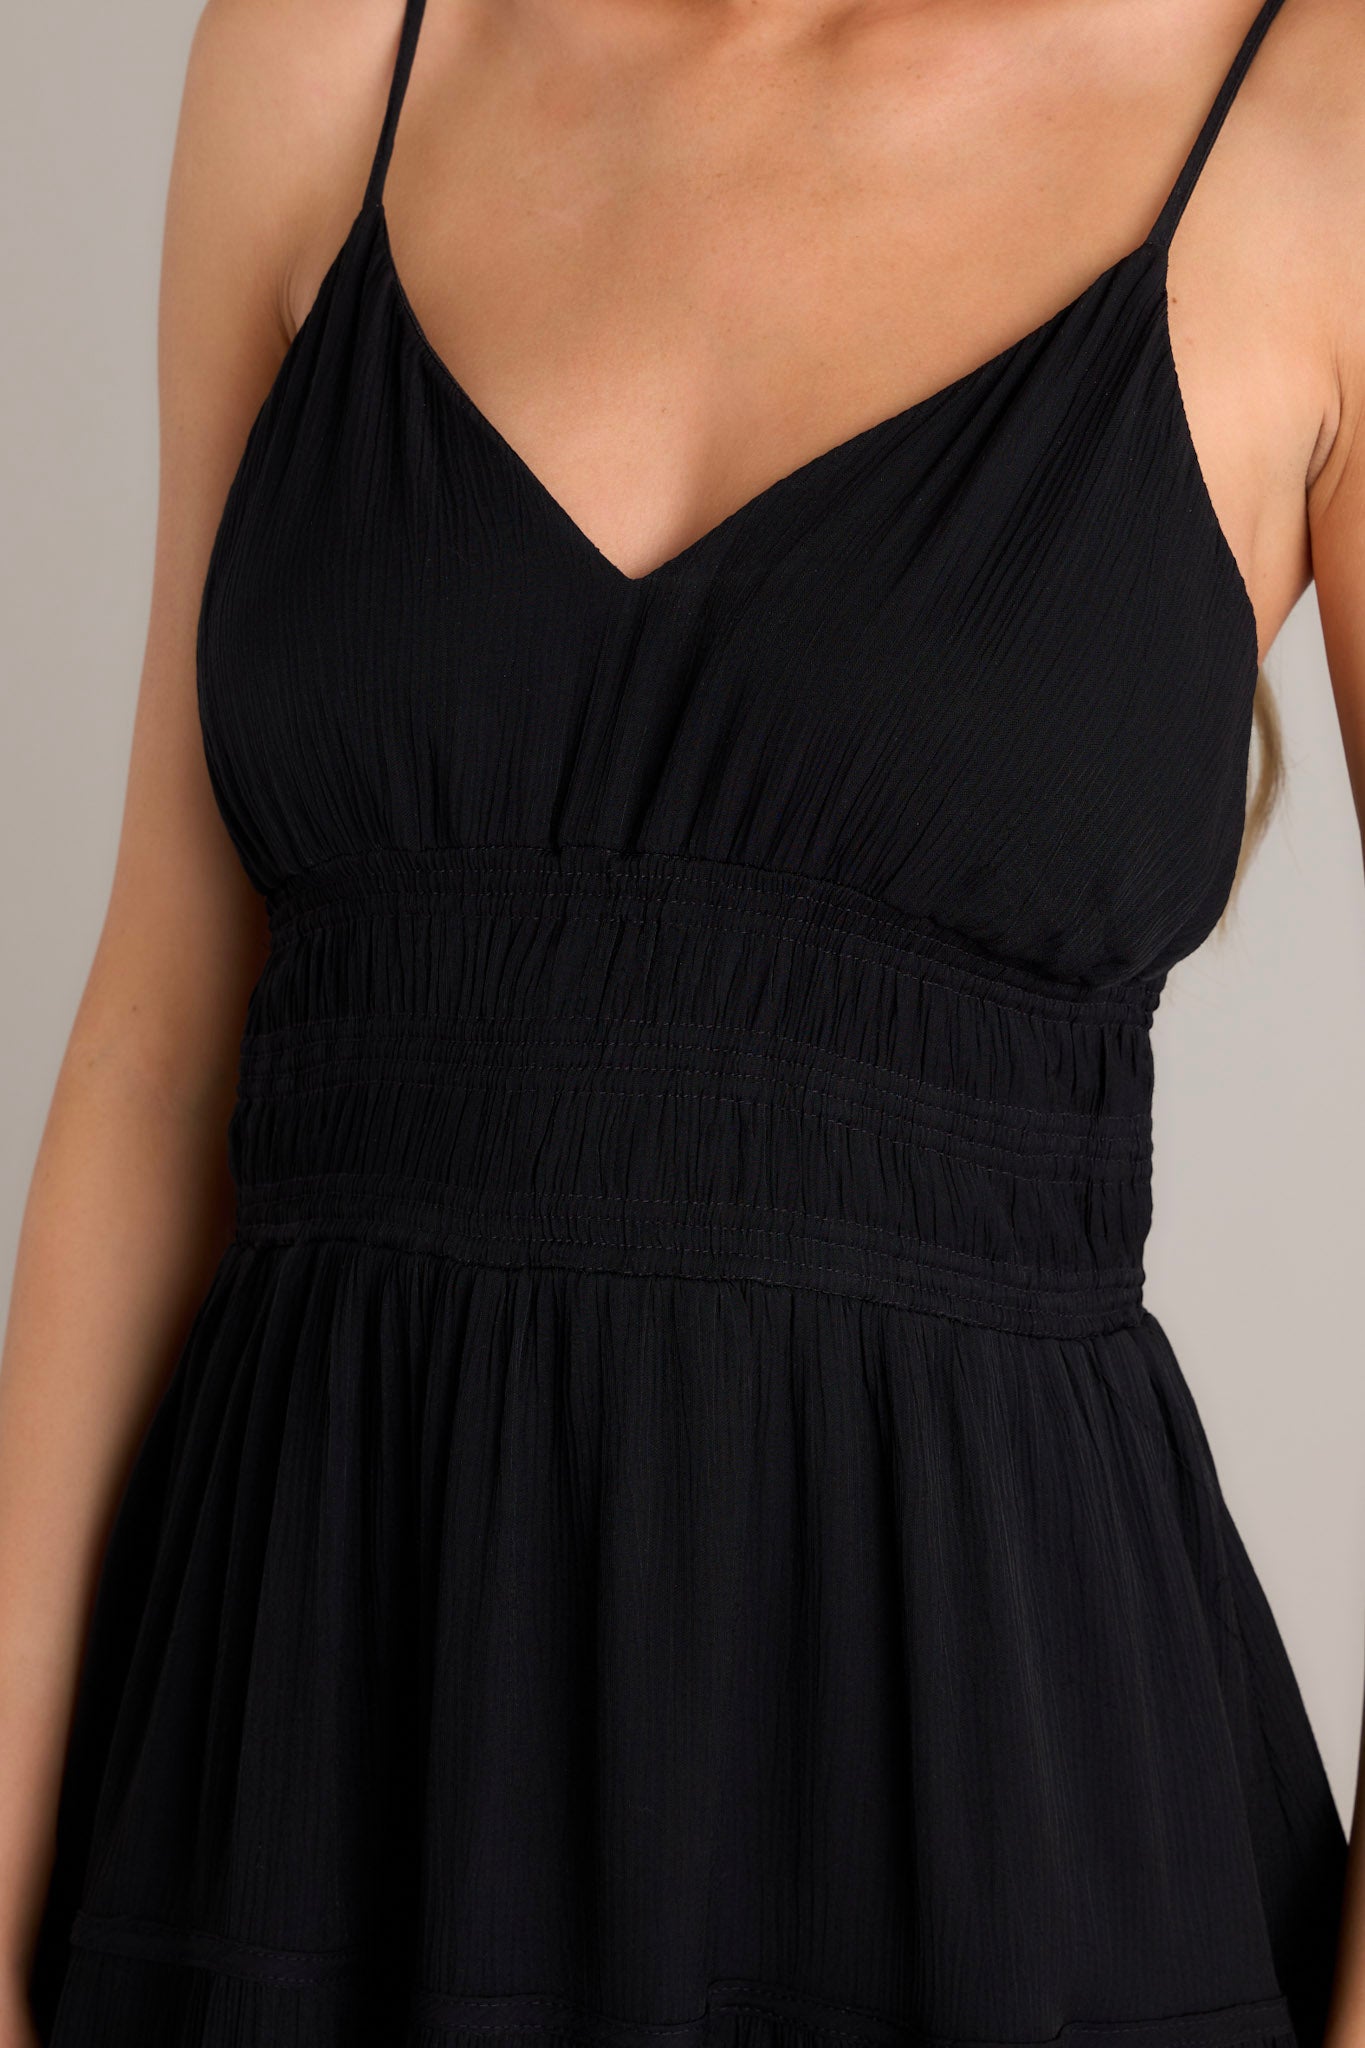 Close-up of the black maxi dress showing the v-neckline, thin adjustable straps, smocked waist and lower back details, and tiered fabric.